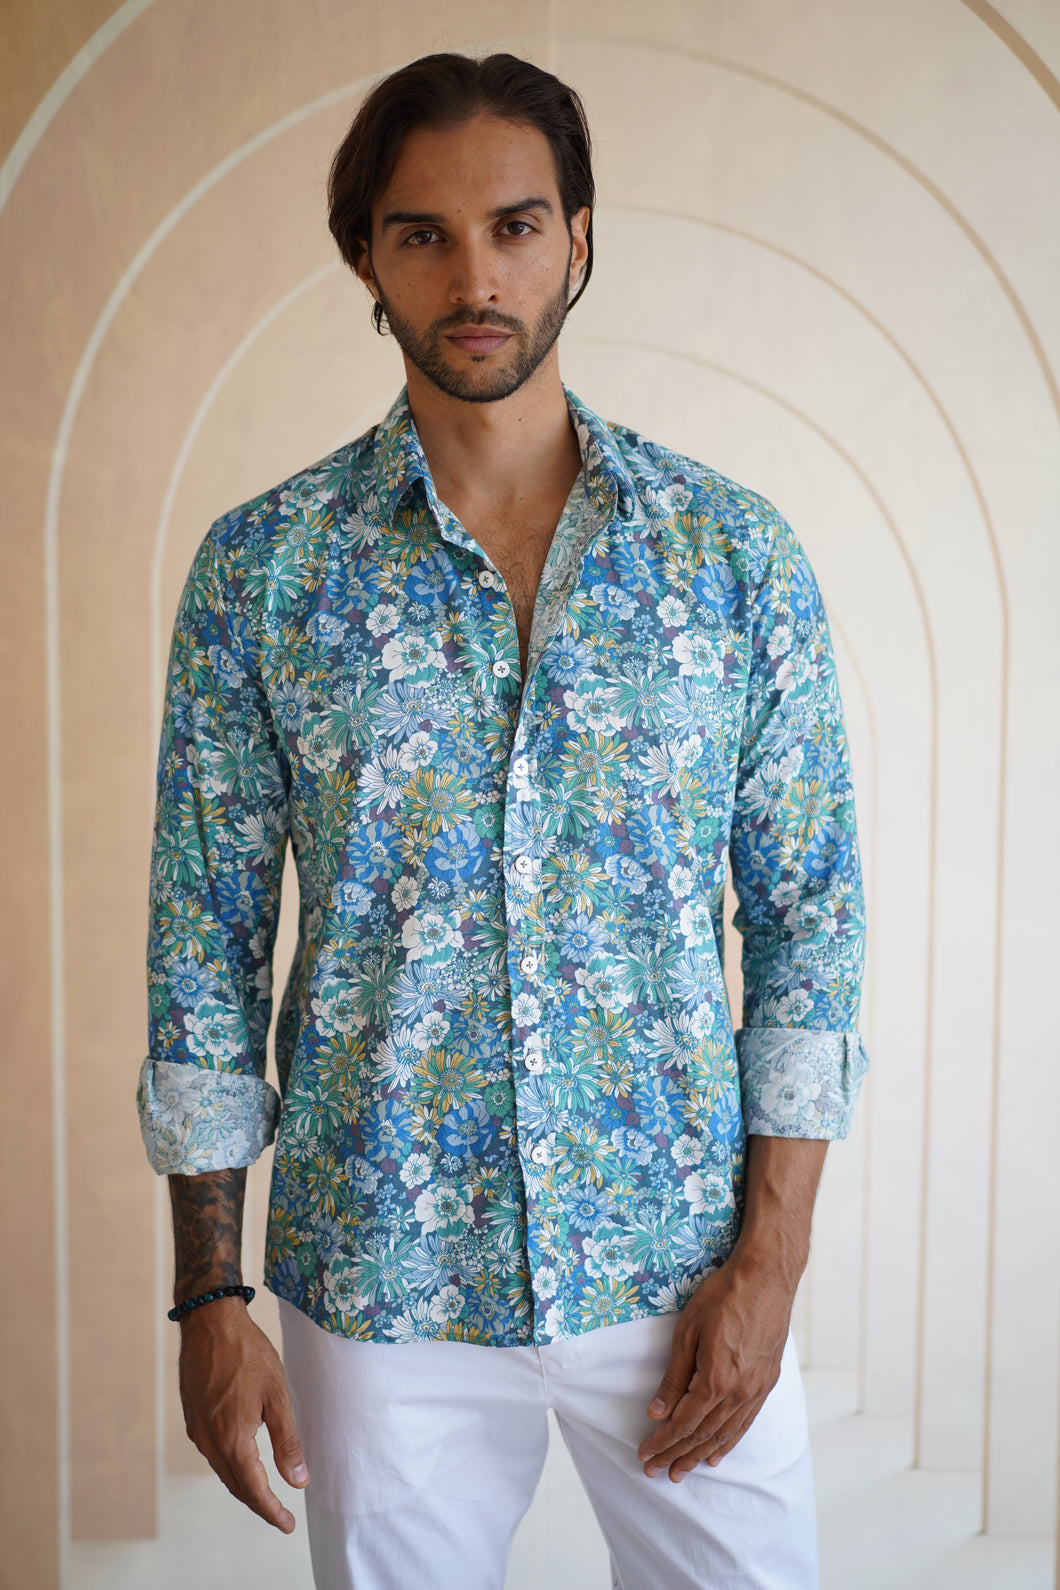 Mens Floral Shirt Tapered Fit 100% Cotton